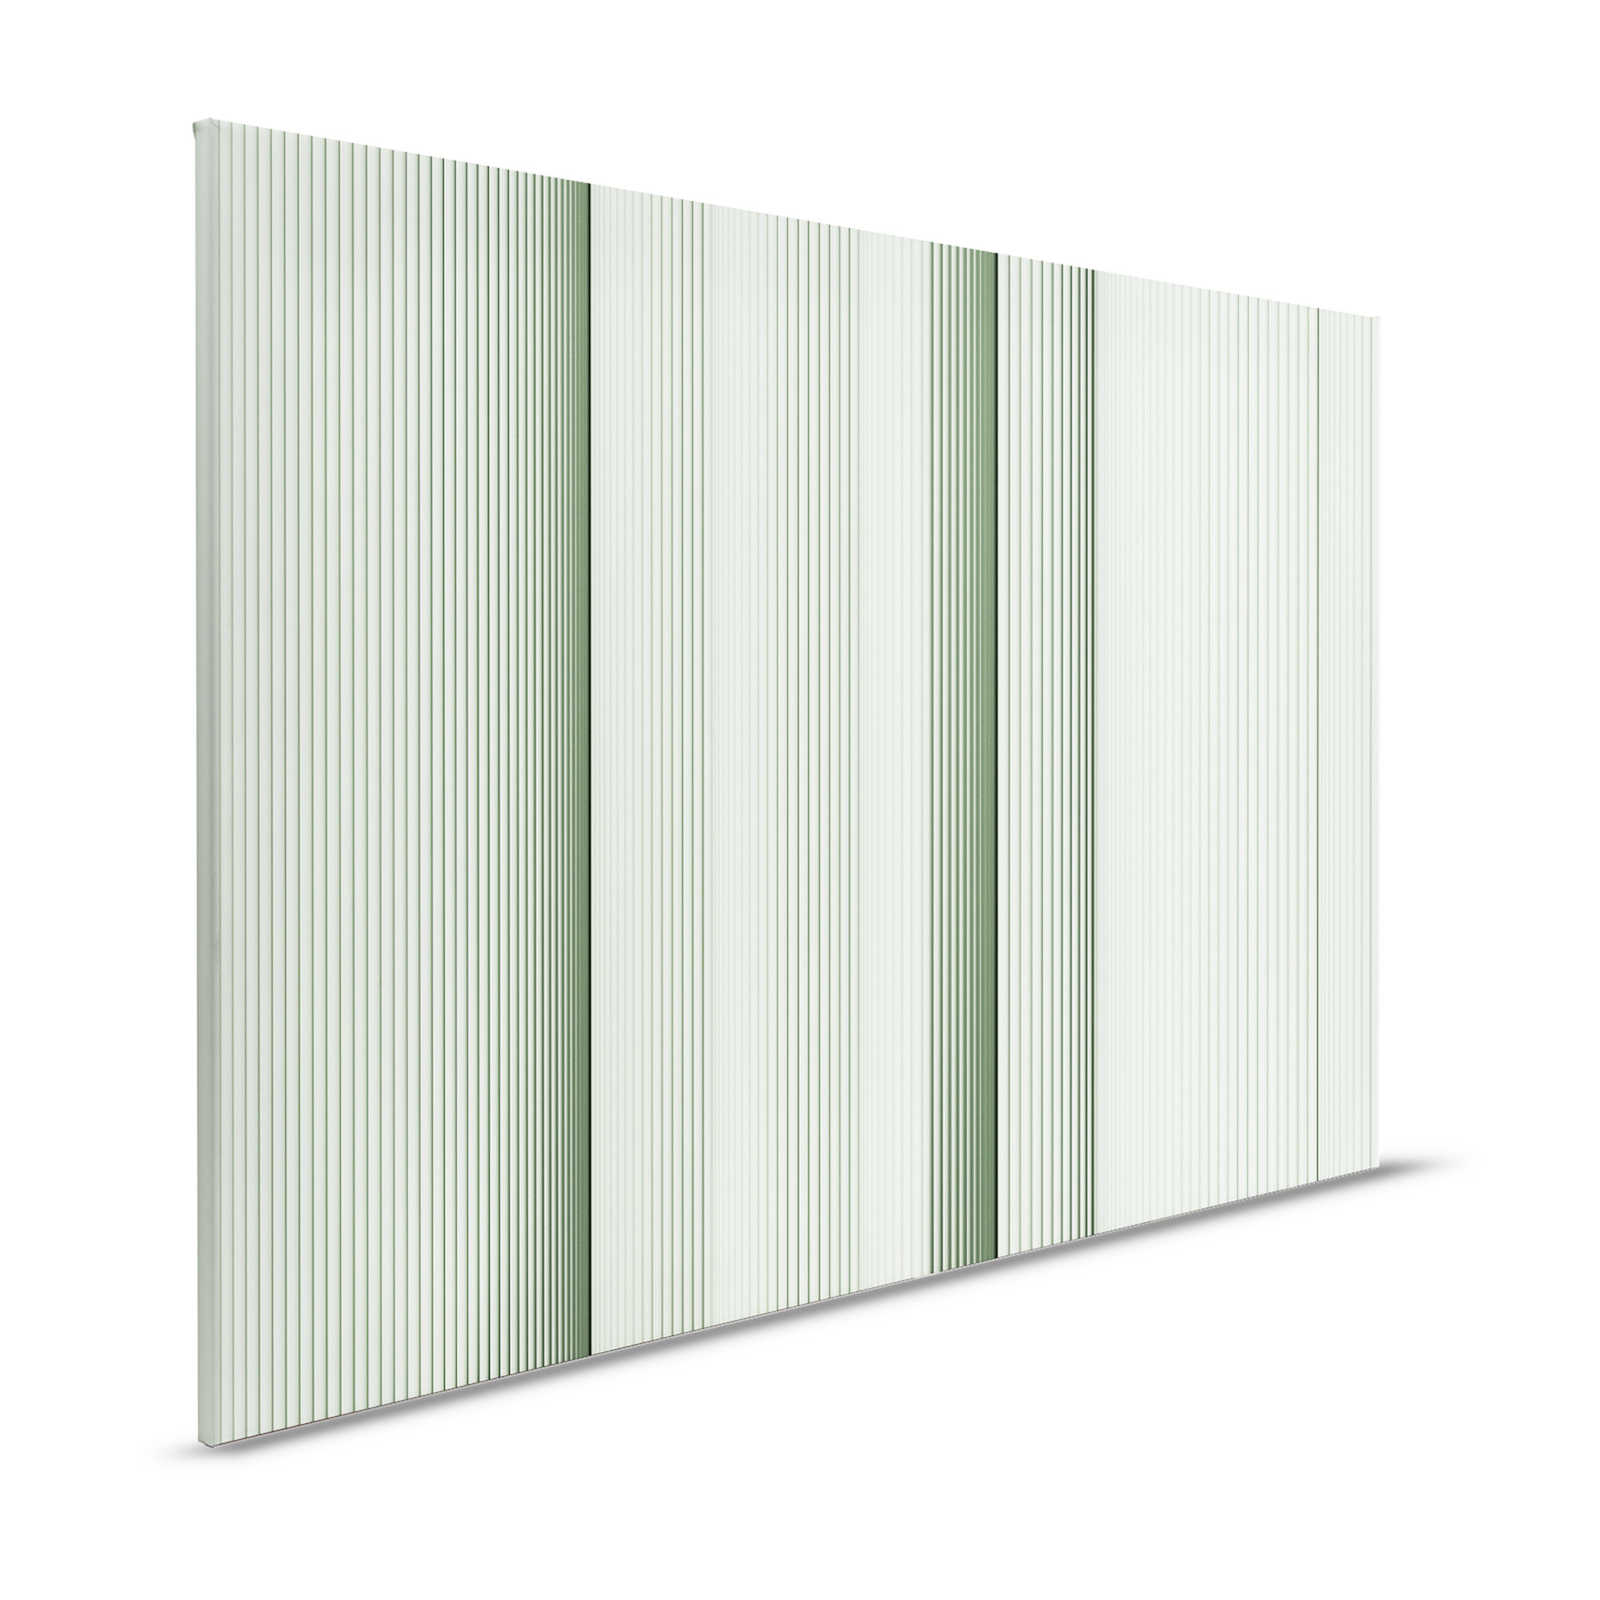 Magic Wall 2 - Green stripes canvas picture with 3D illusion effect - 1,20 m x 0,80 m
